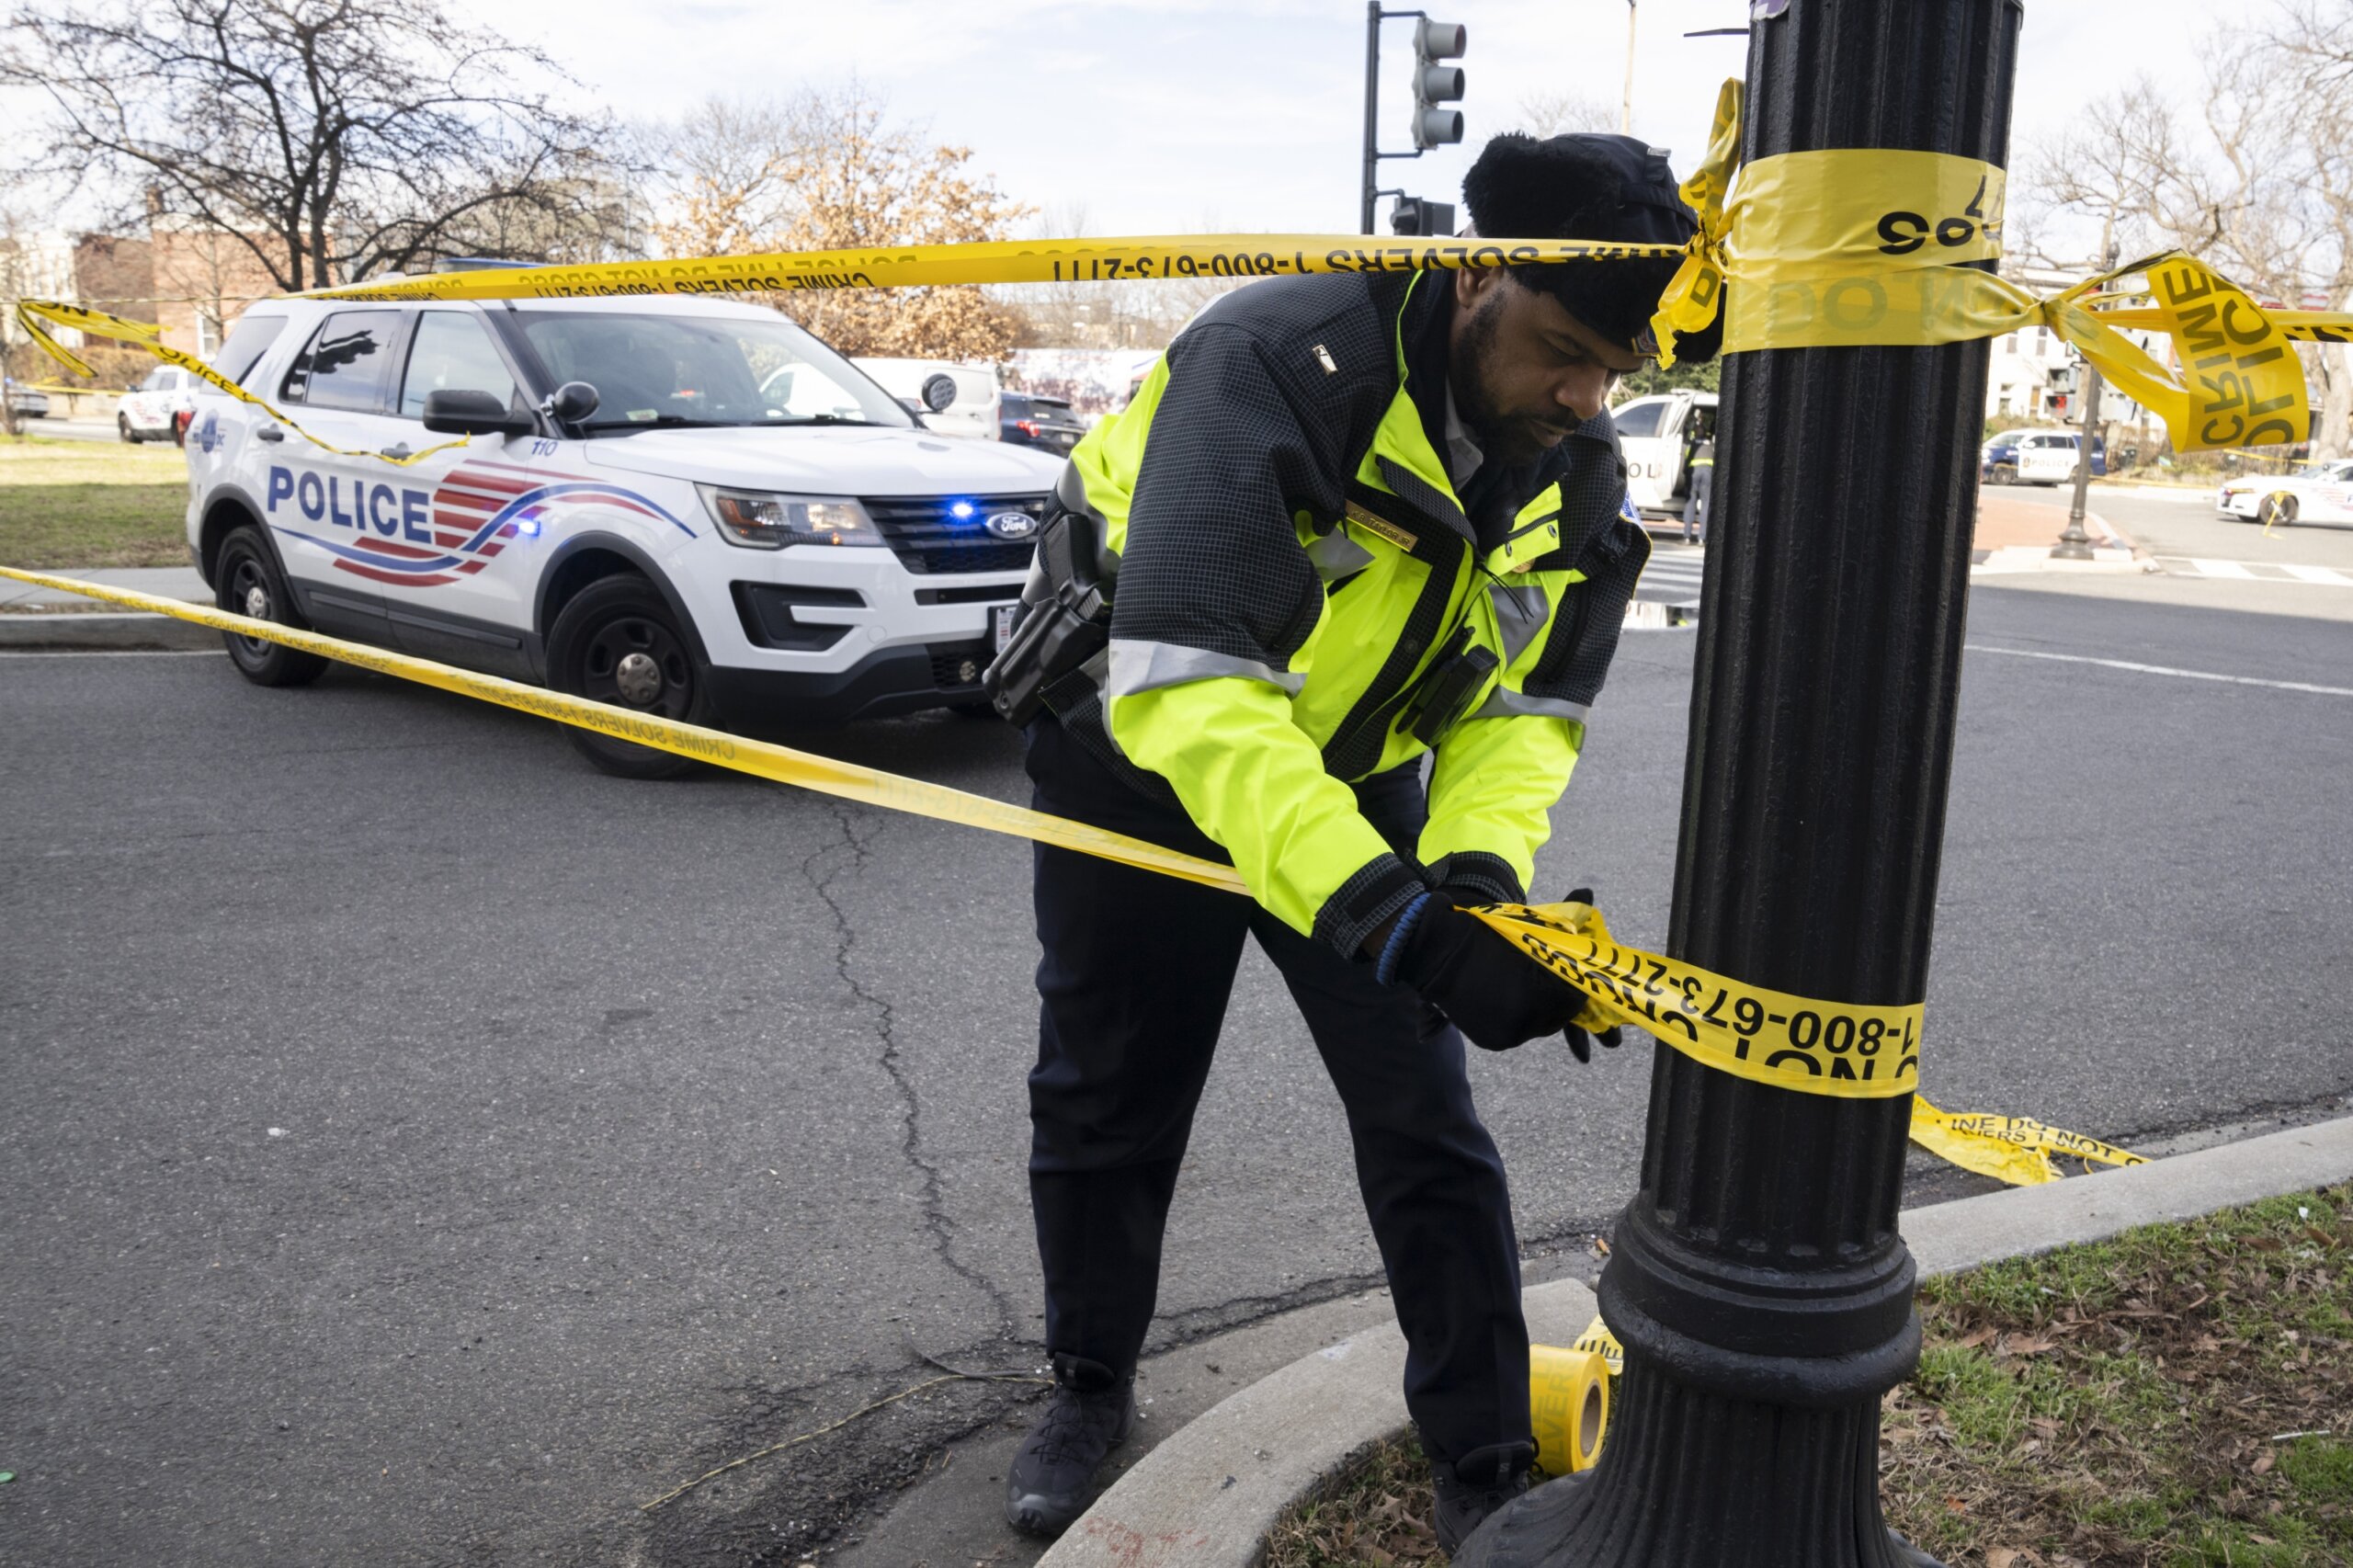 Amid crime surge, DC lawmakers weigh harsher punishments – WTOP News